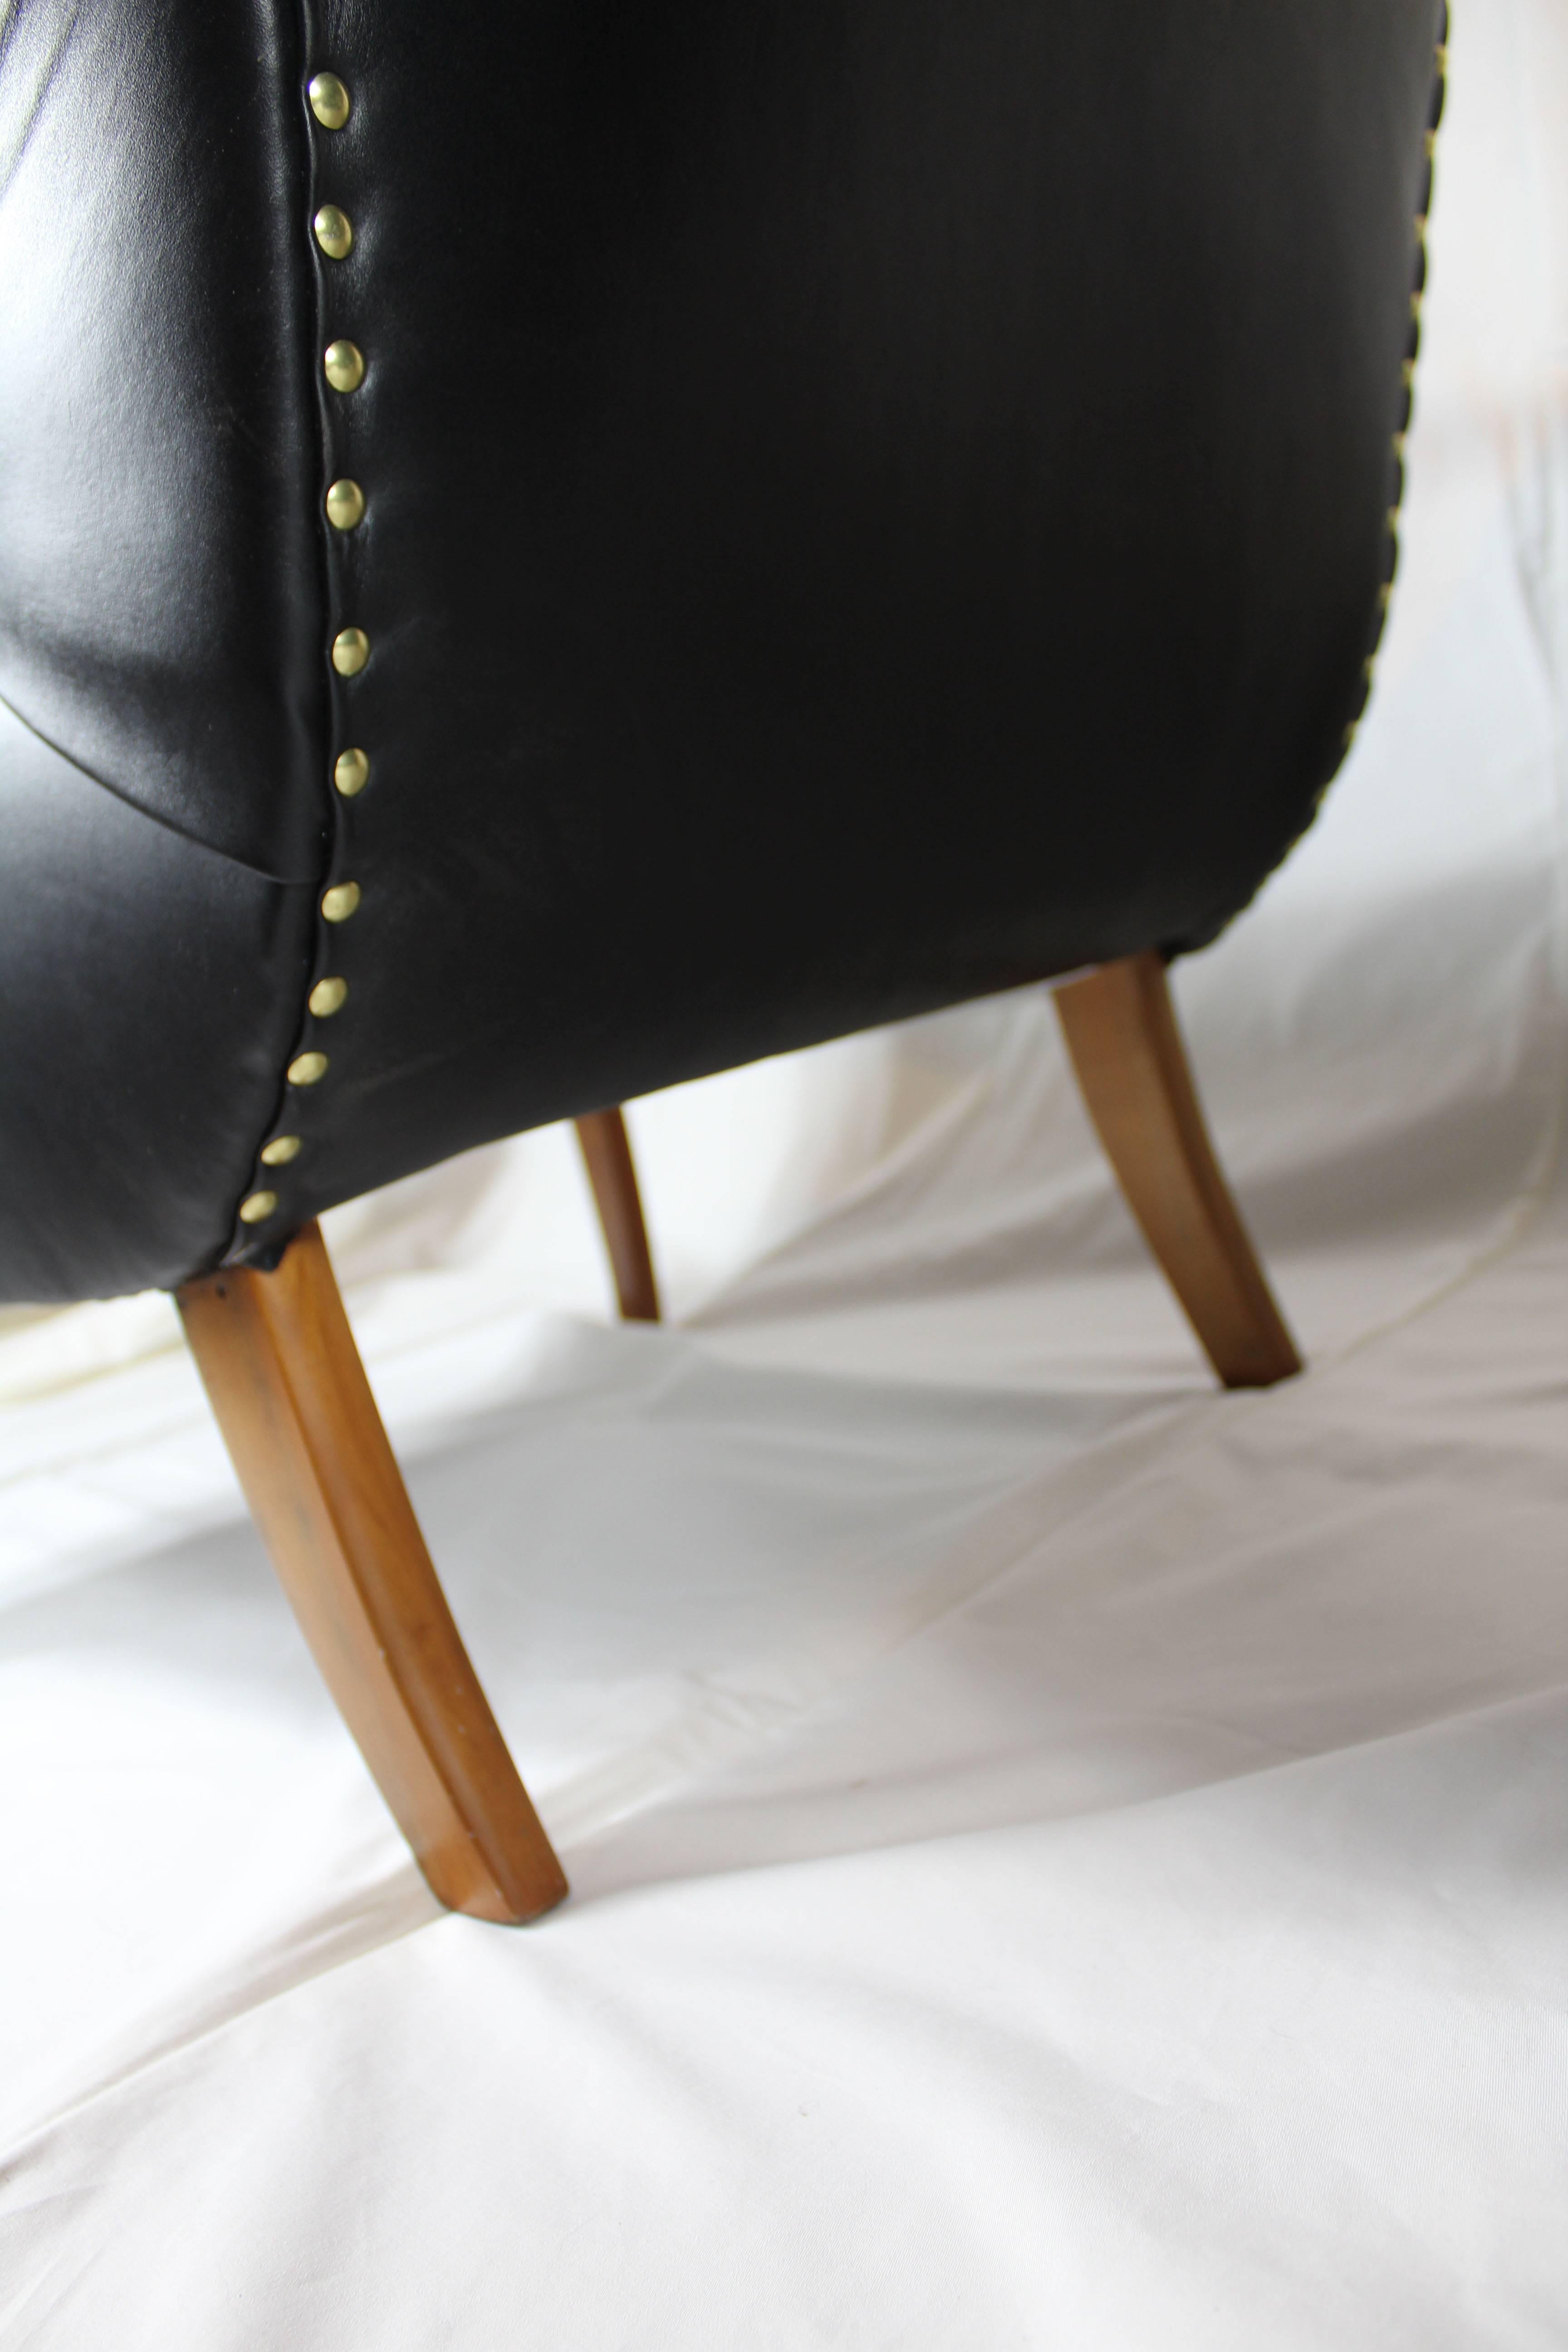 Italian Black Leather Pair of Armchairs, 1950s For Sale 3